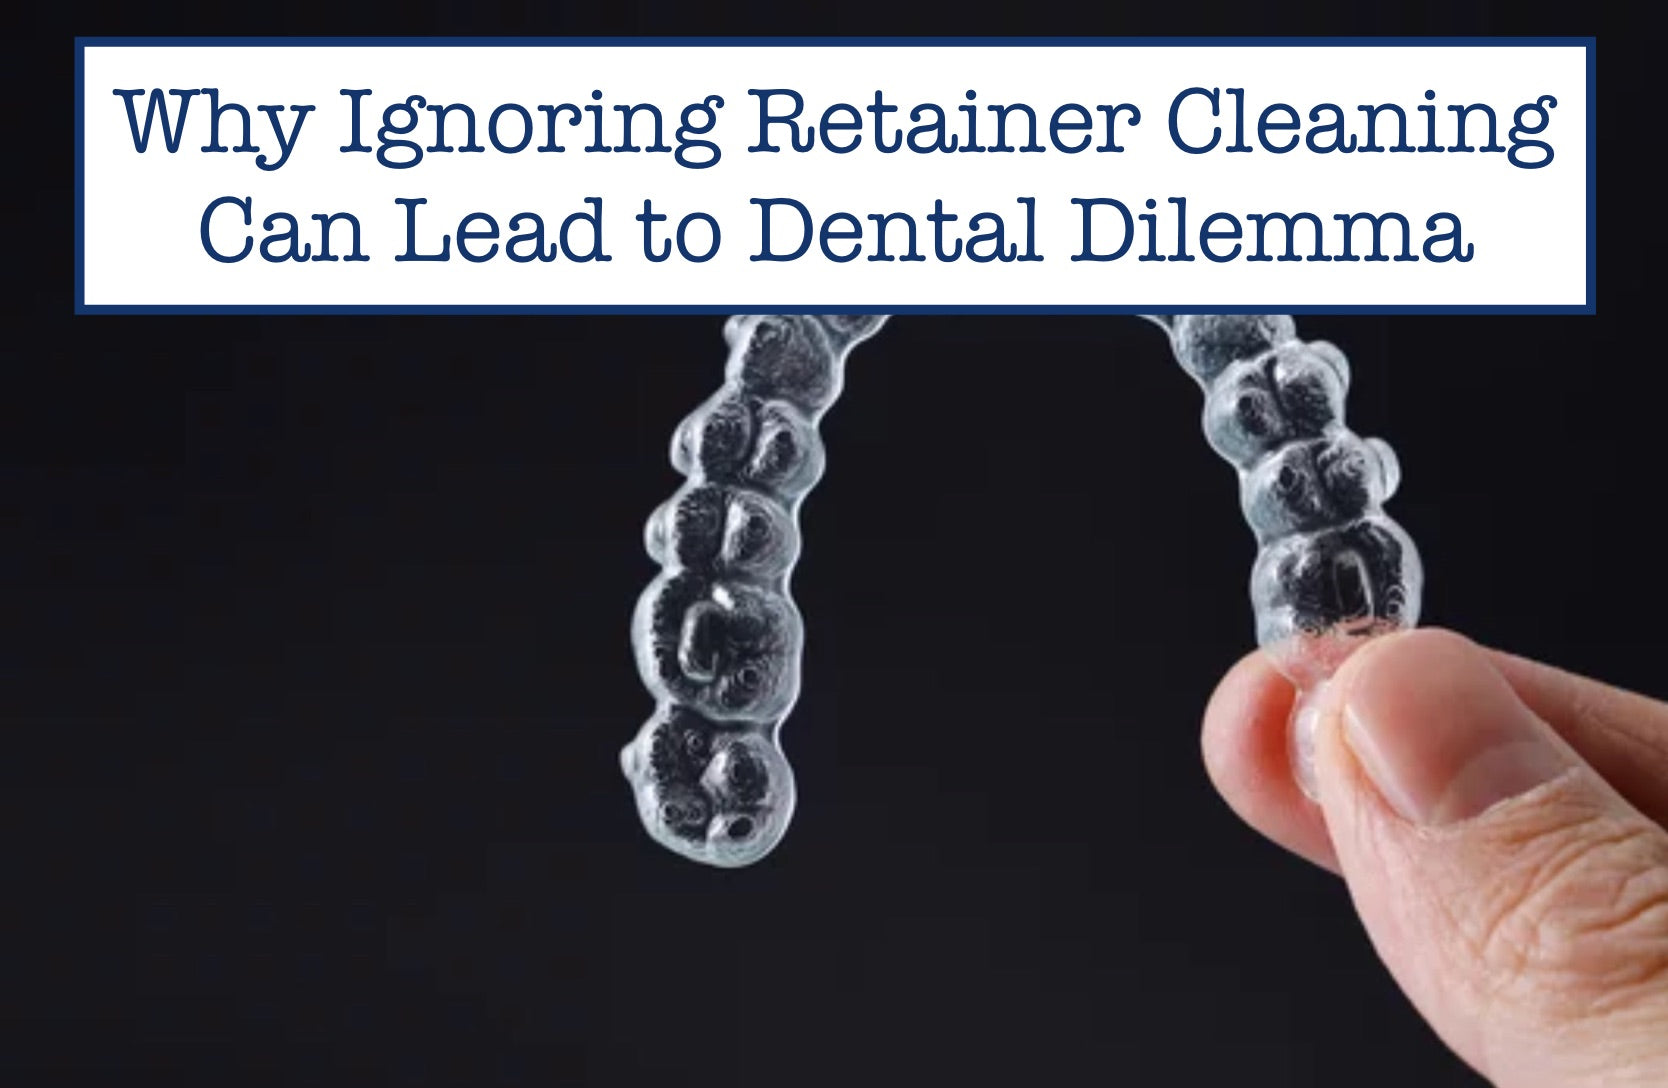 Why Ignoring Retainer Cleaning Can Lead to Dental Dilemma